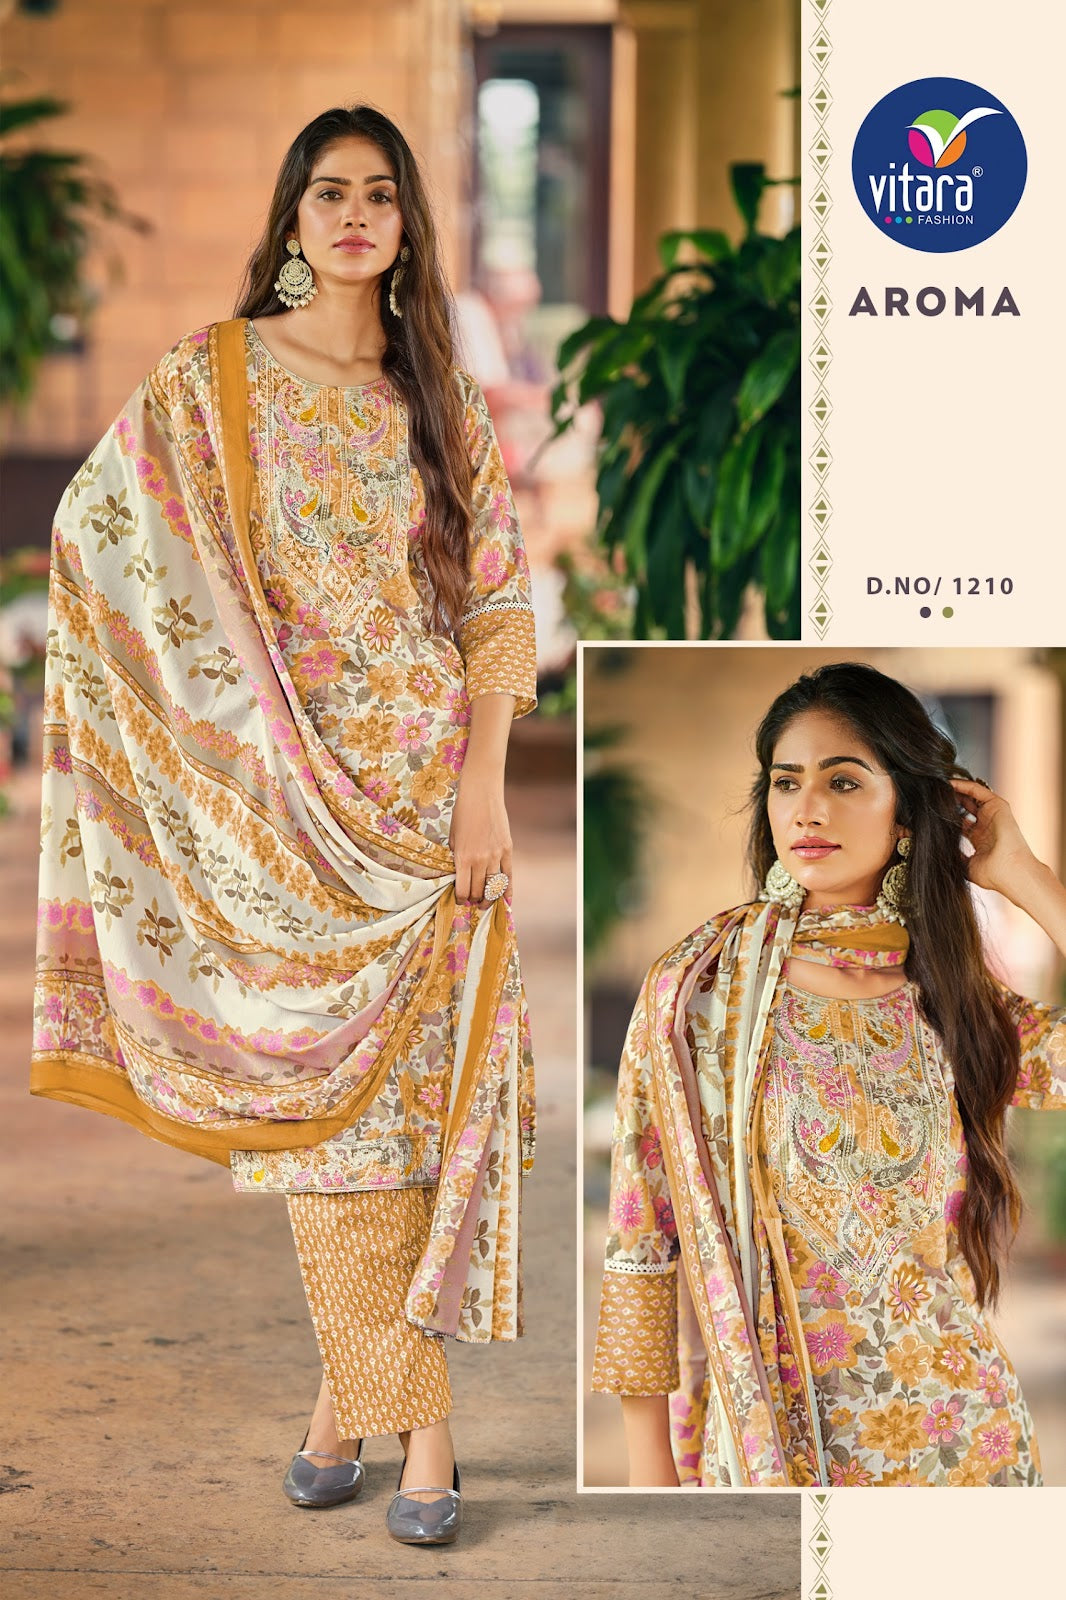 Aroma Vitara Cambric Readymade Pant Style Suits Supplier India